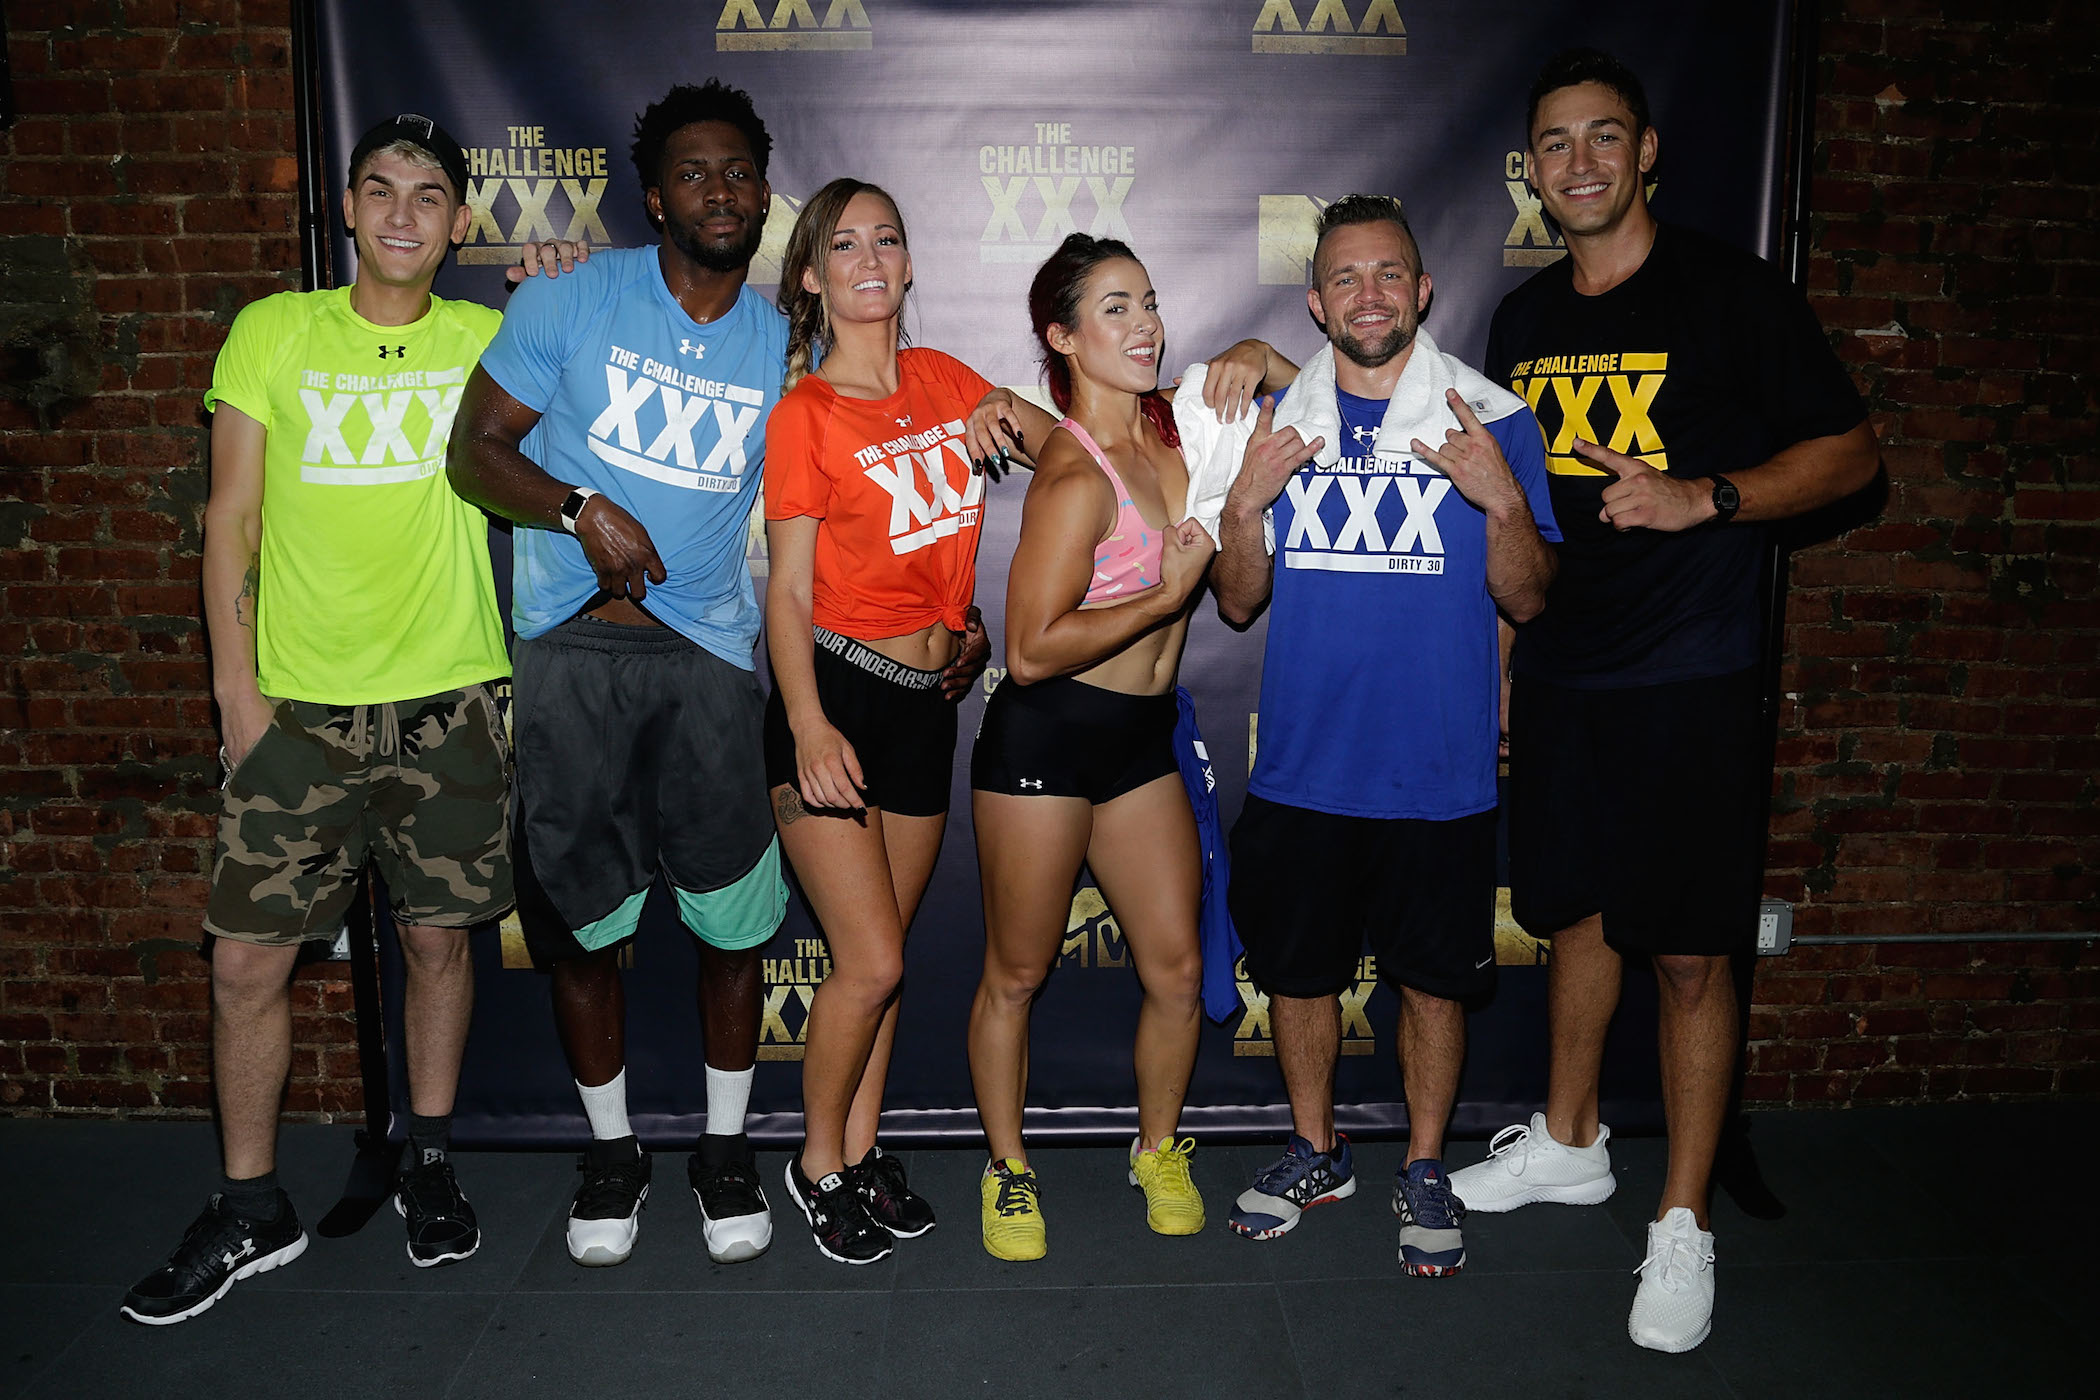 Cast members from MTV's 'The Challenge' standing together and posing for a photo